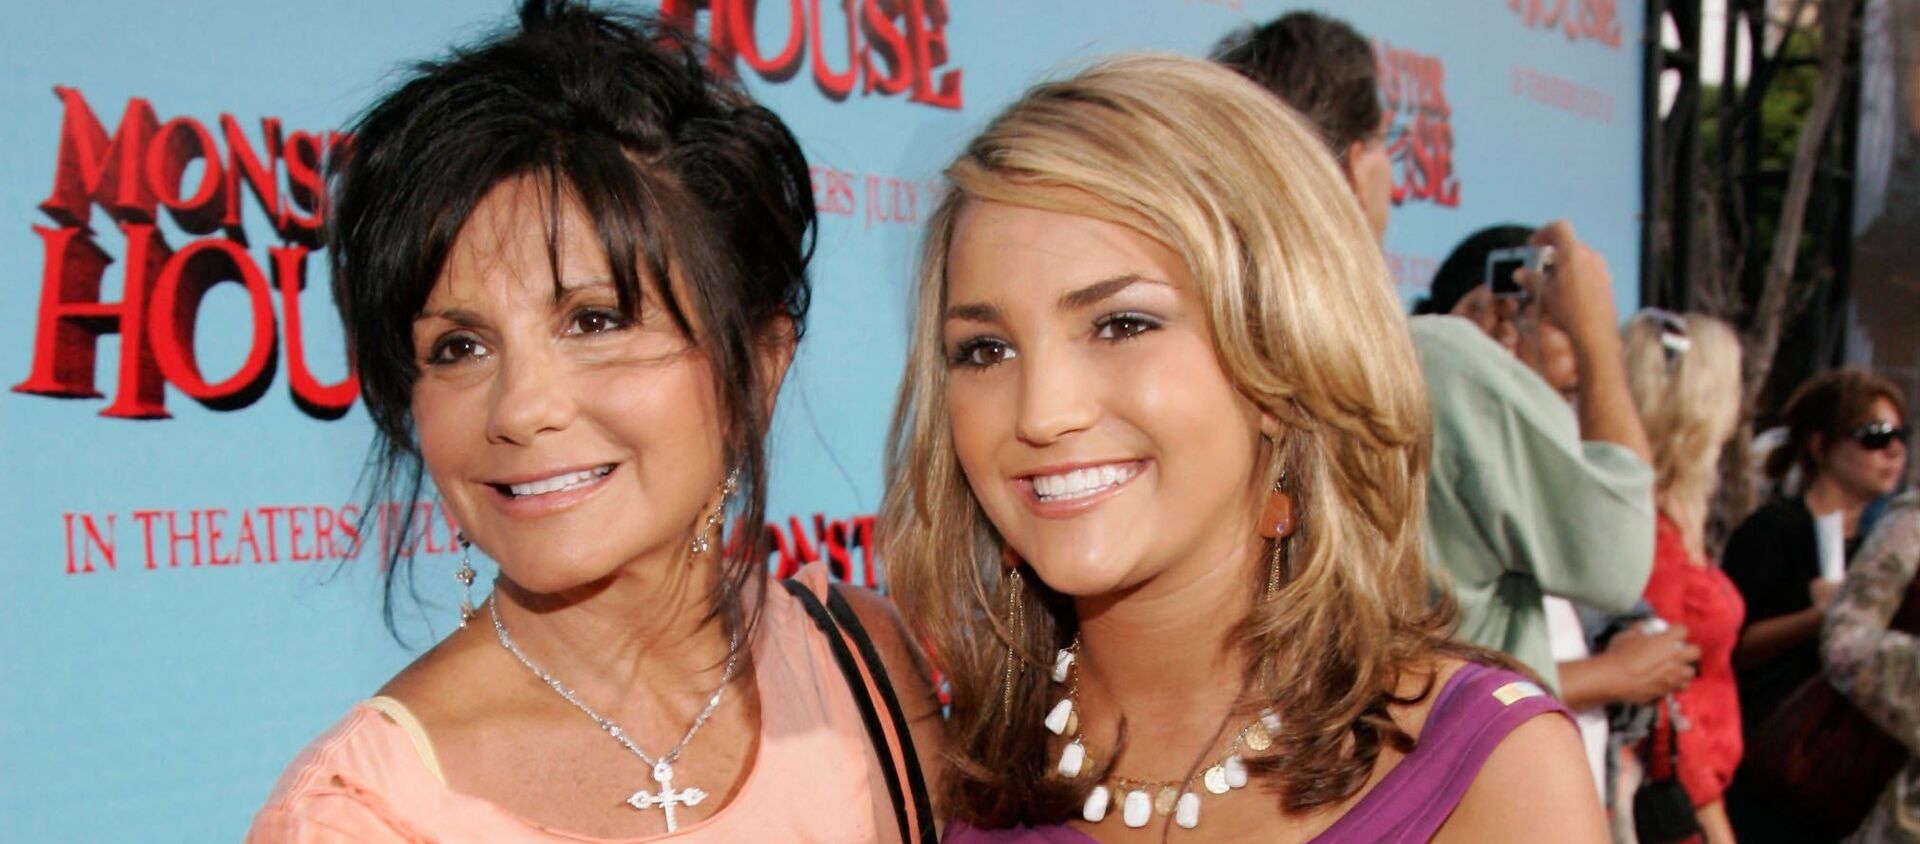 Actress Jamie Lynn Spears (R) and mother Lynne Spears arrive at Sony Pictures premiere of Monster House held at Mann's Village Theatre on July 17, 2006 in Westwood, California.  - Sputnik International, 1920, 03.07.2021